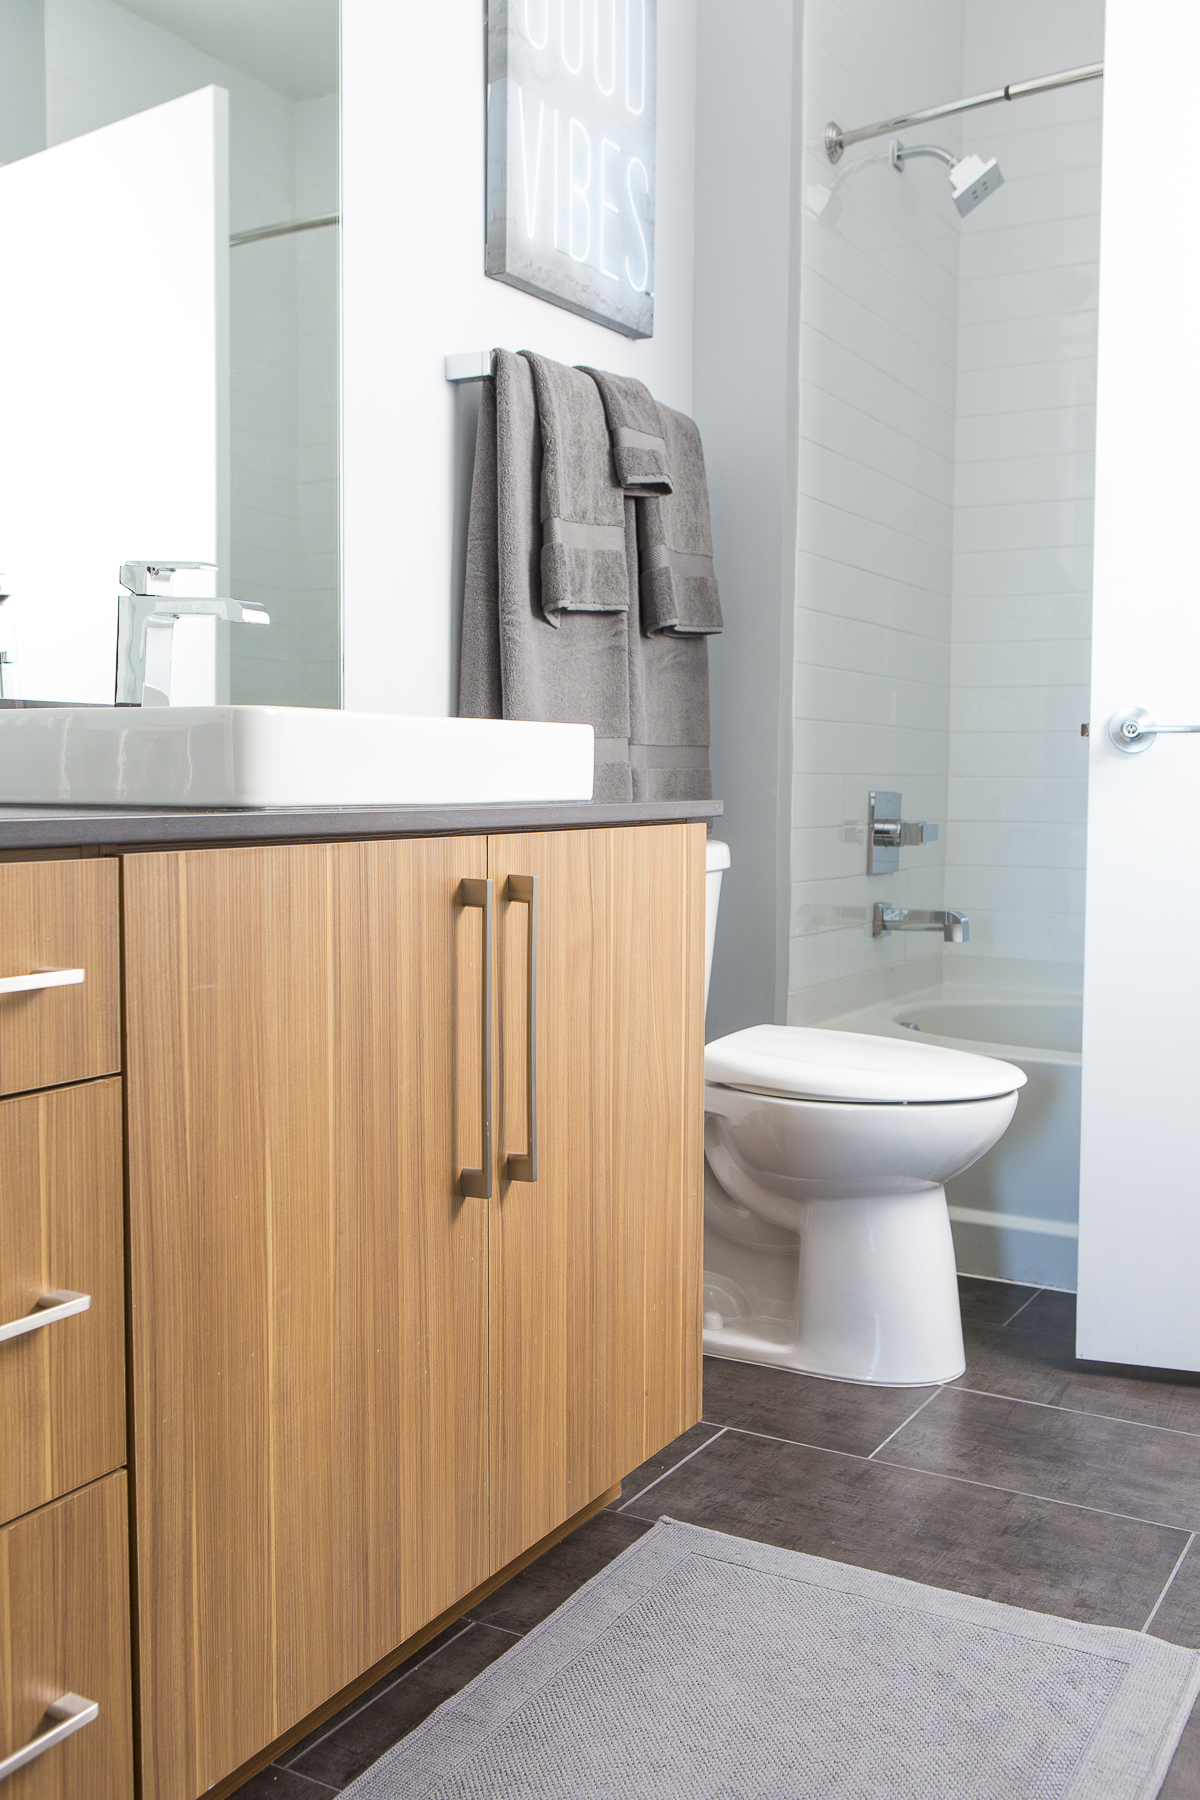 Bathrooms feature contemporary fixtures and finishes